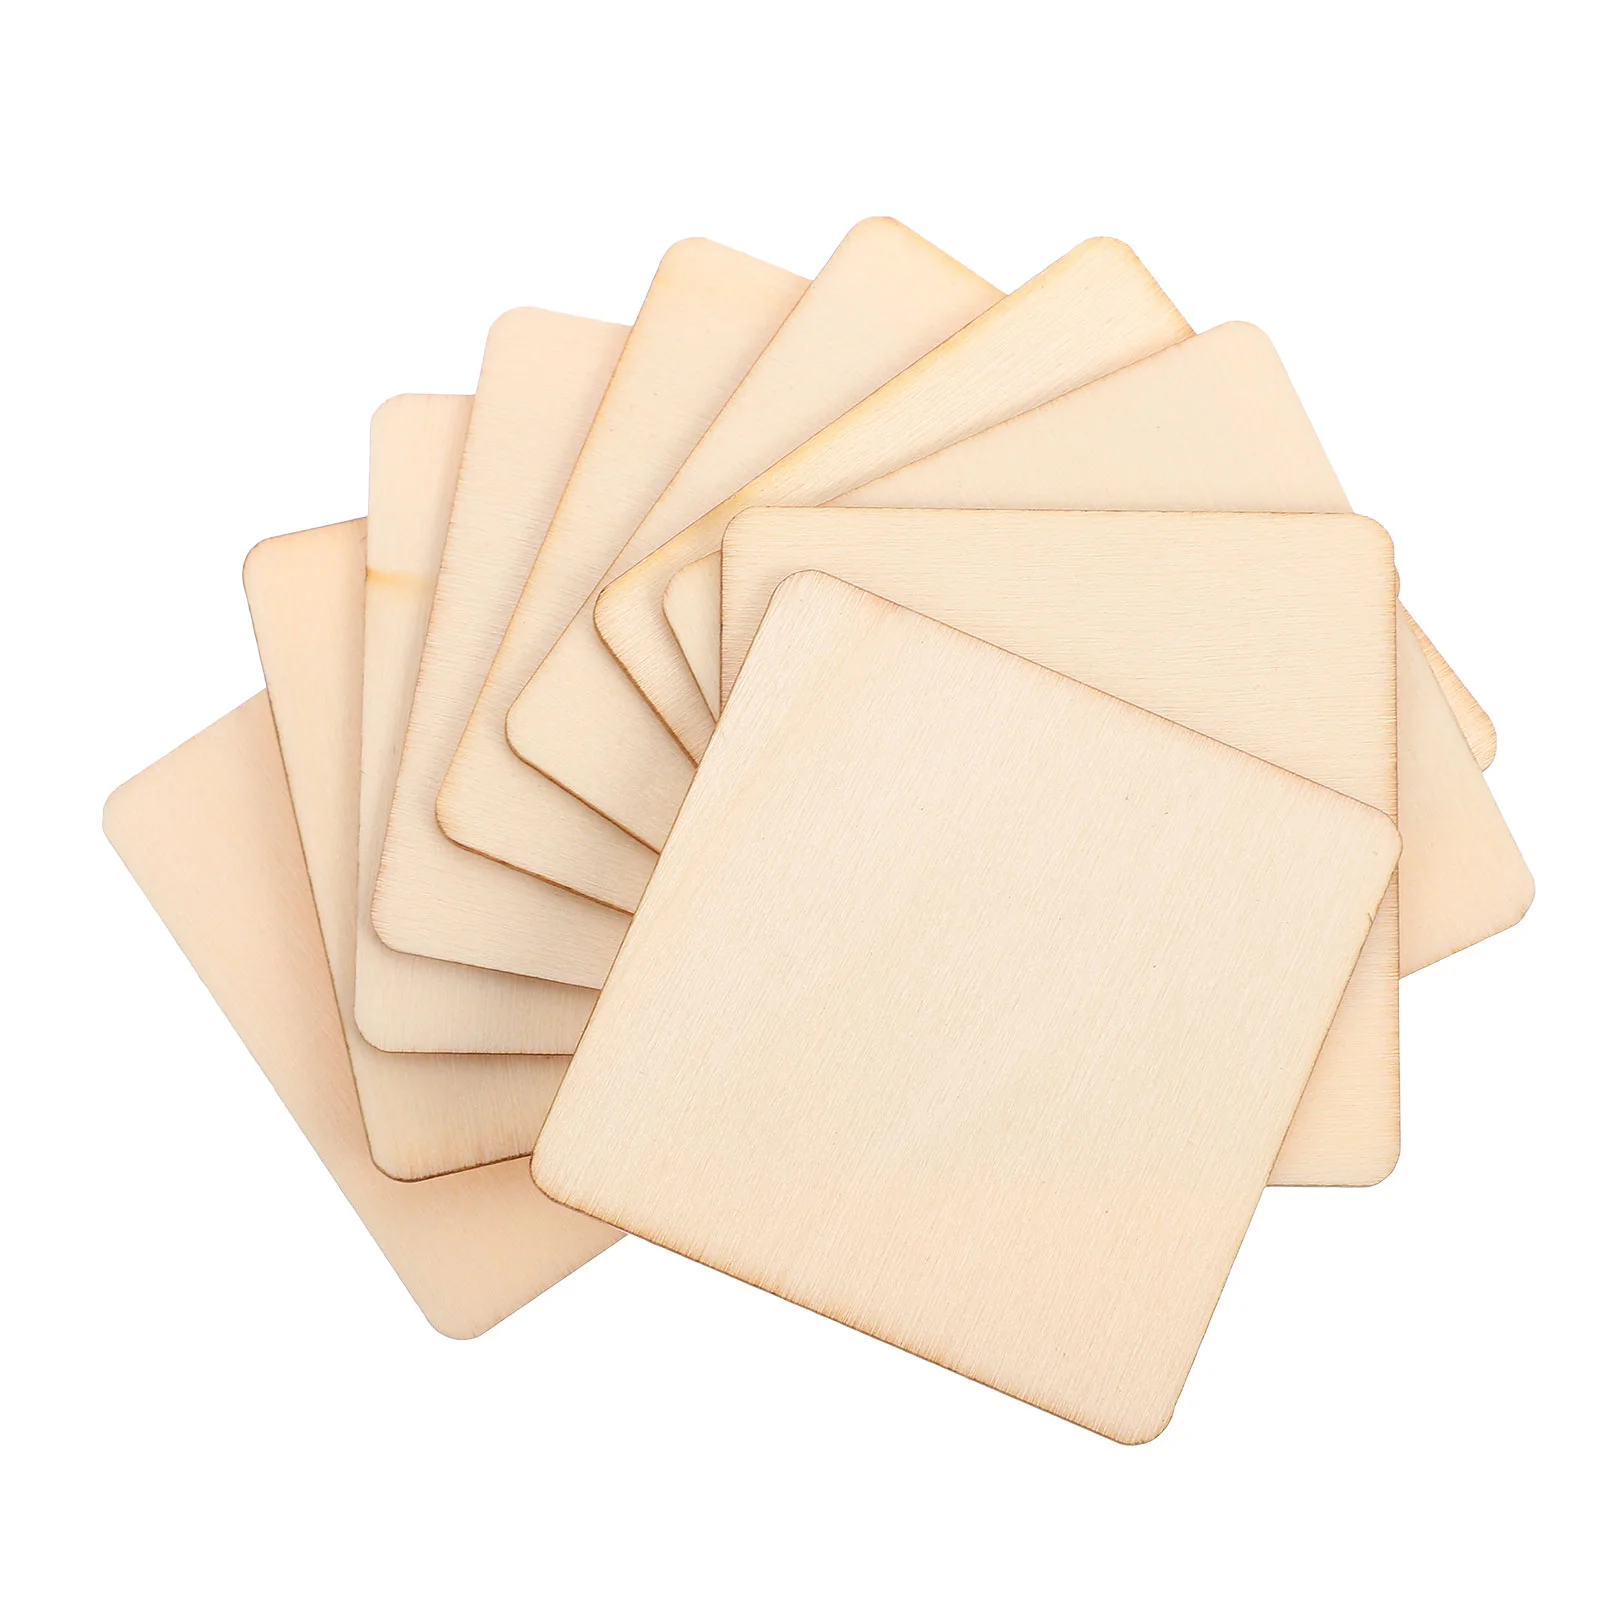 

50pcs Blank Wooden Slices Home Decors Unfinished Wood Chips Graffiti Supplies